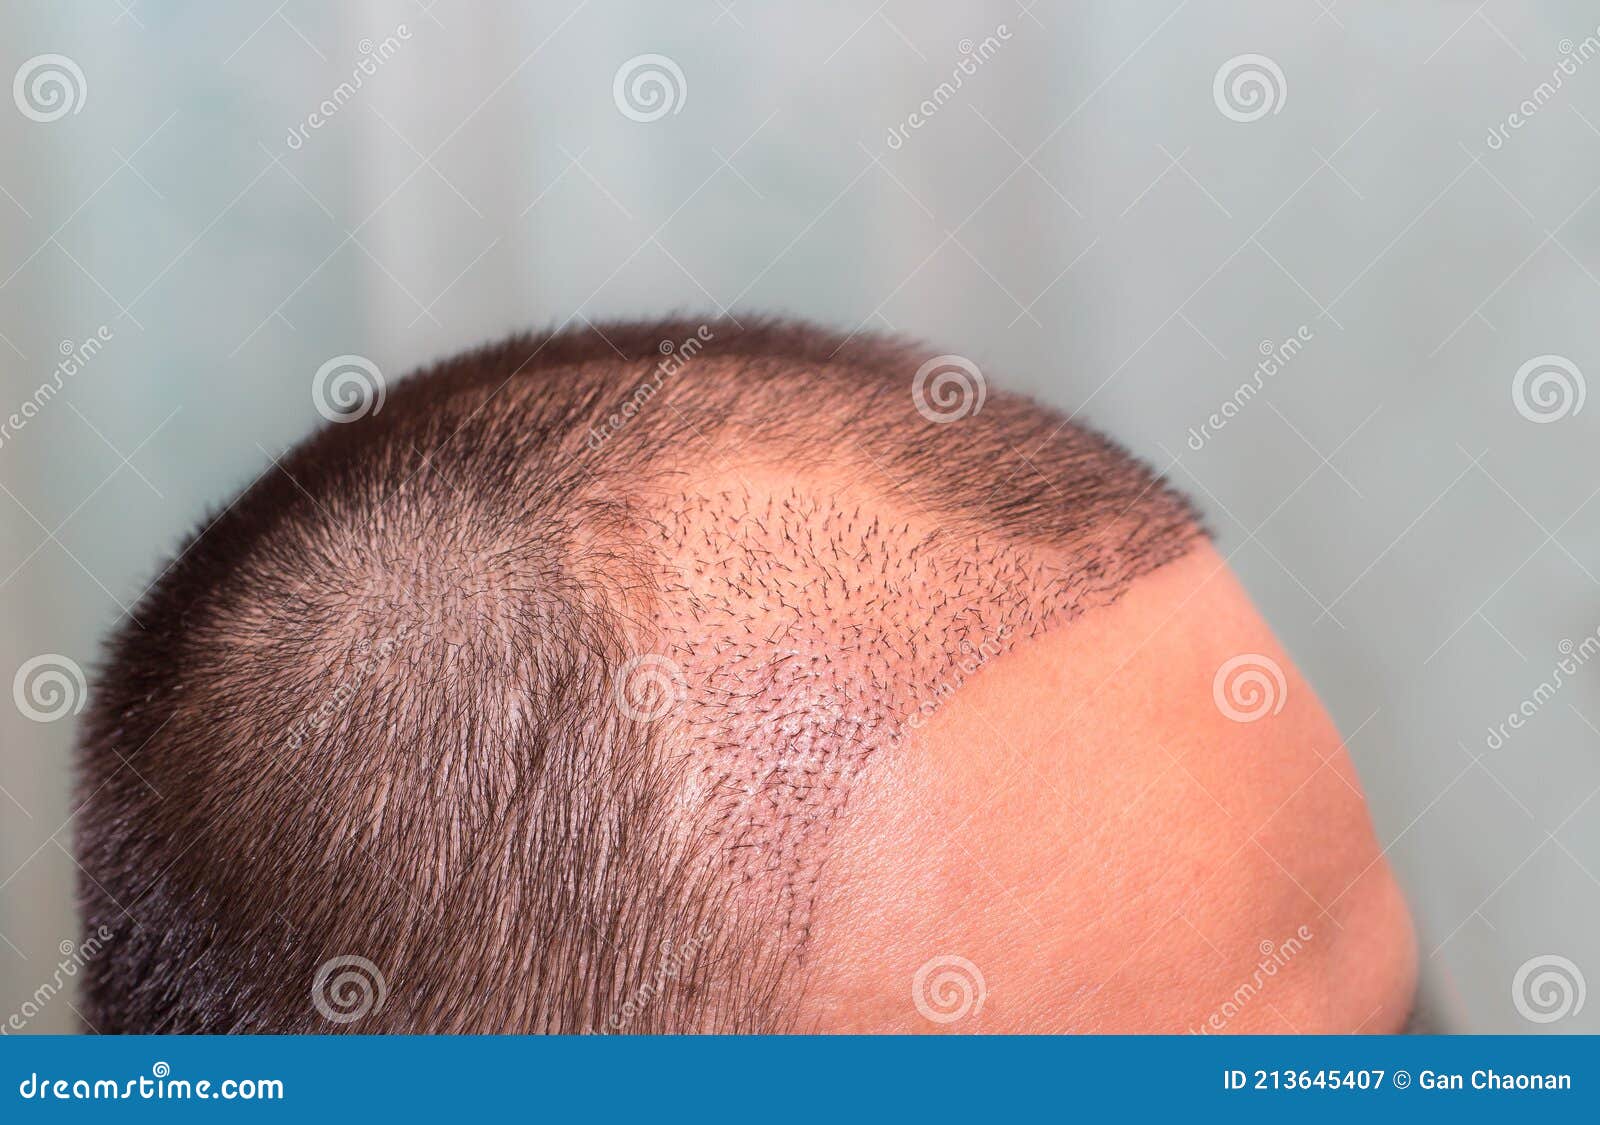 top view of a man`s head with hair transplant surgery with a receding hair line